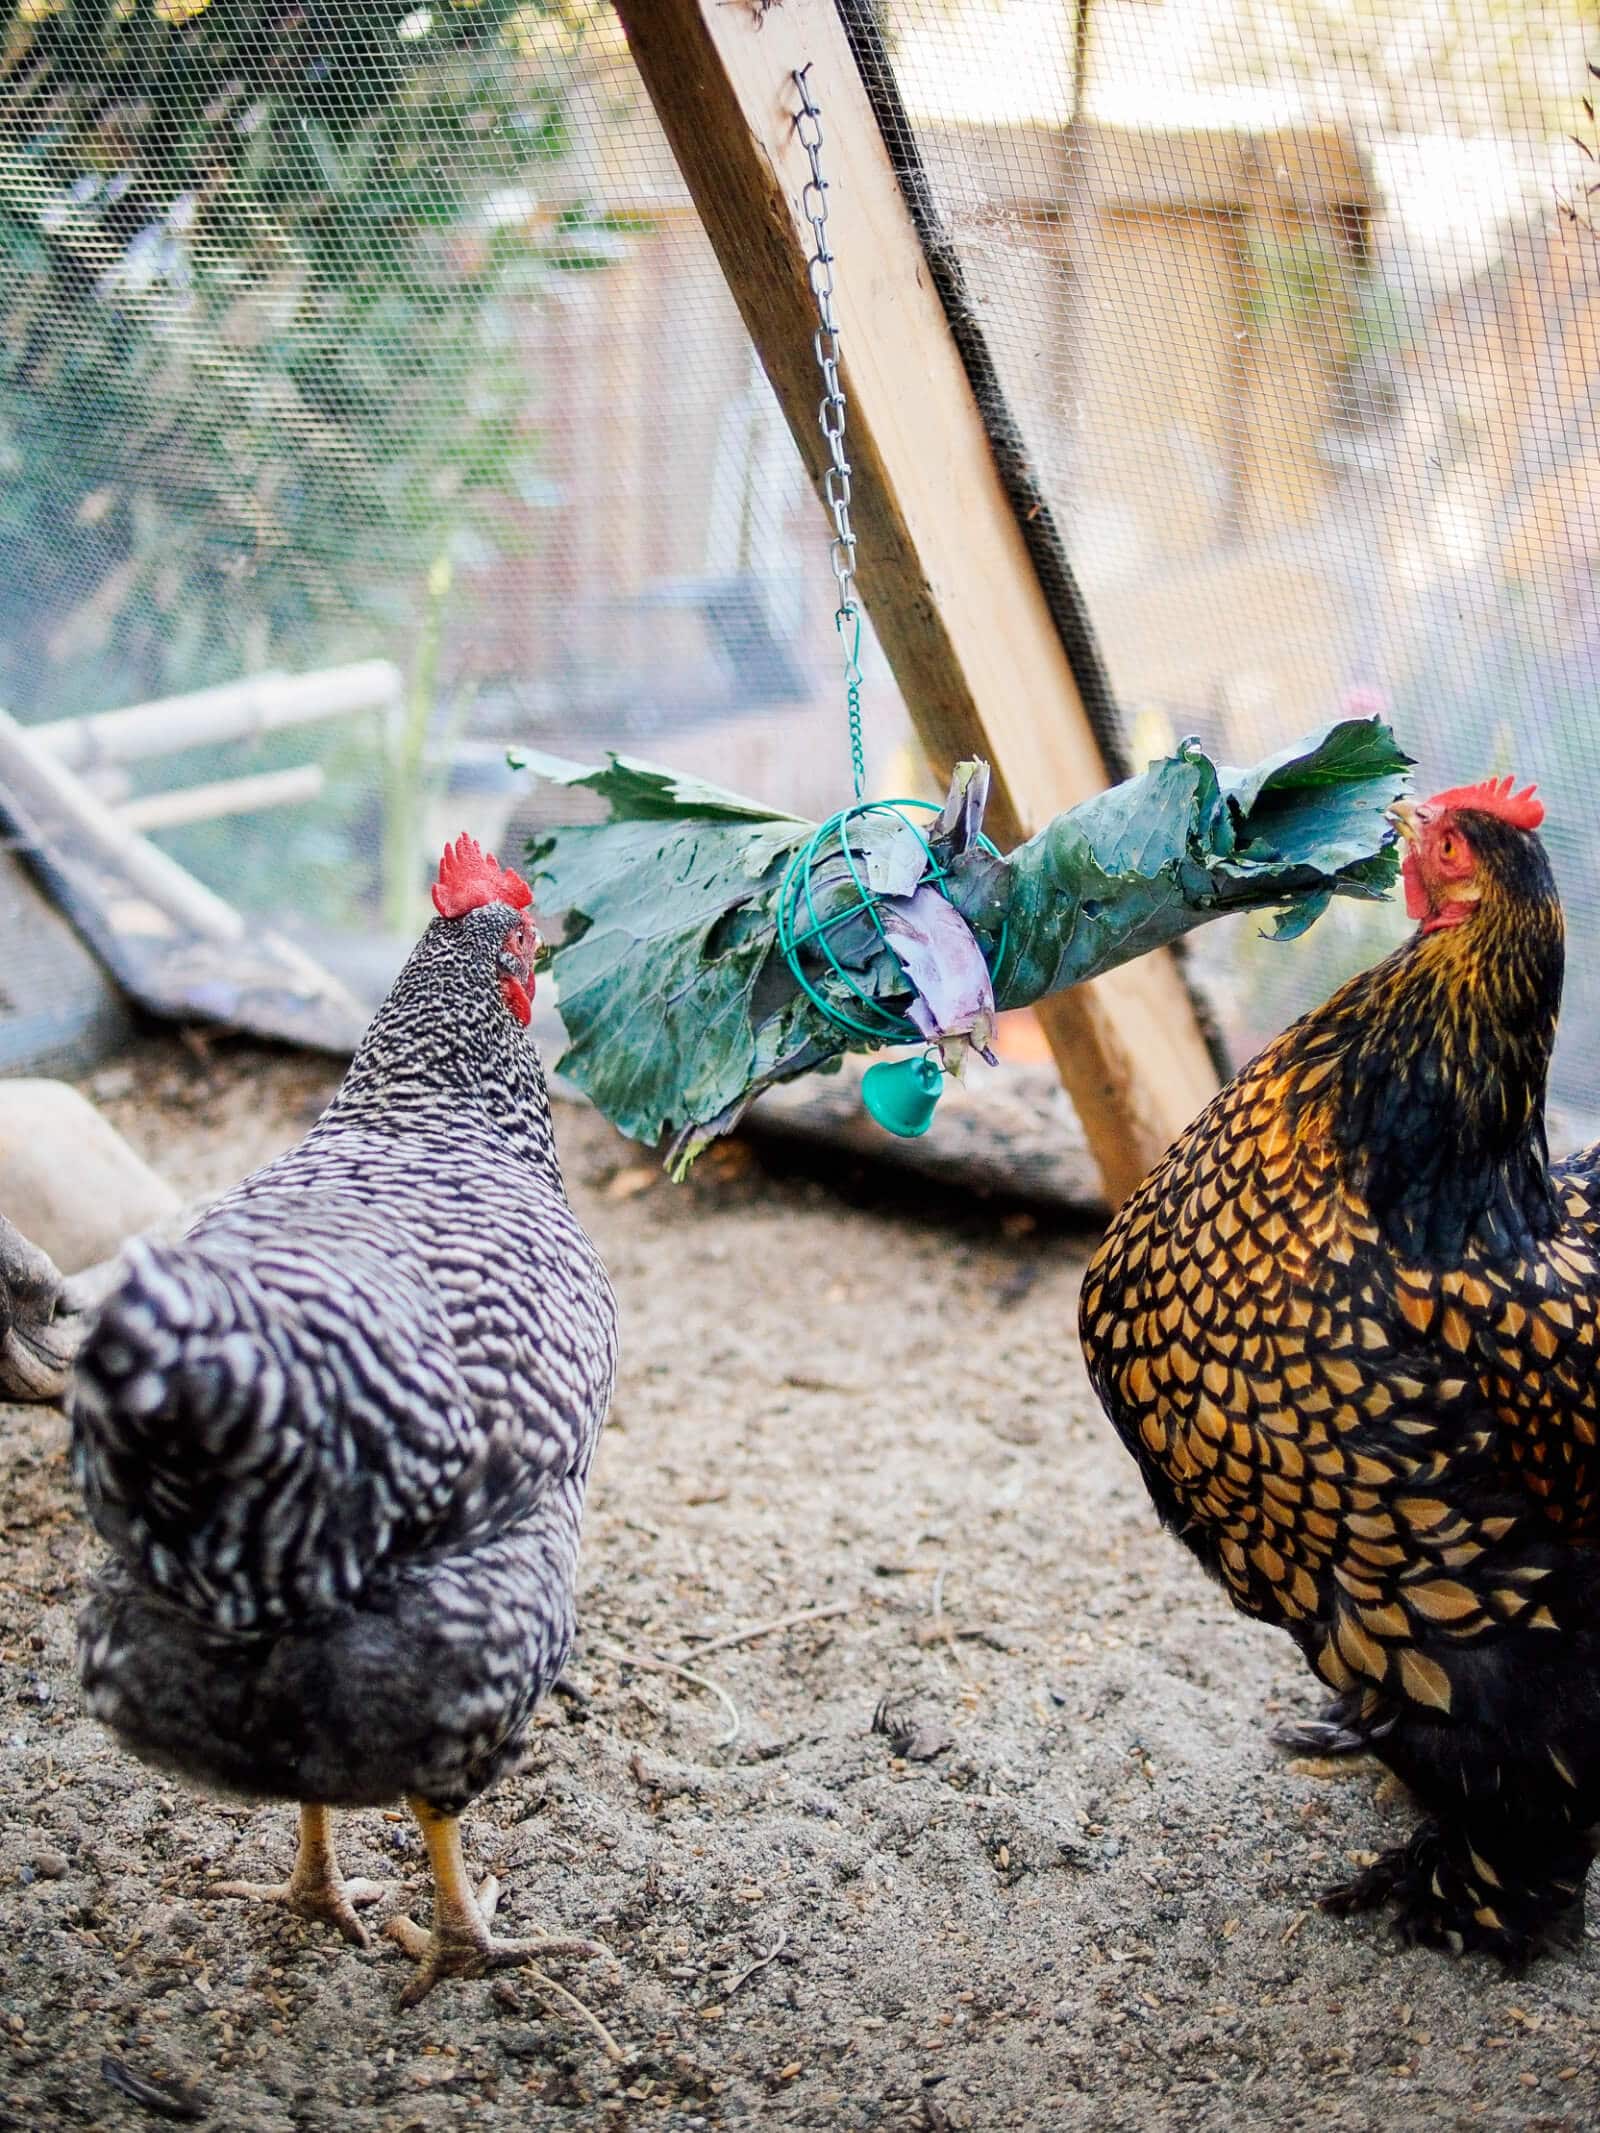 Stuff a treat ball with fresh greens to give your chickens a healthy snack and a little exercise